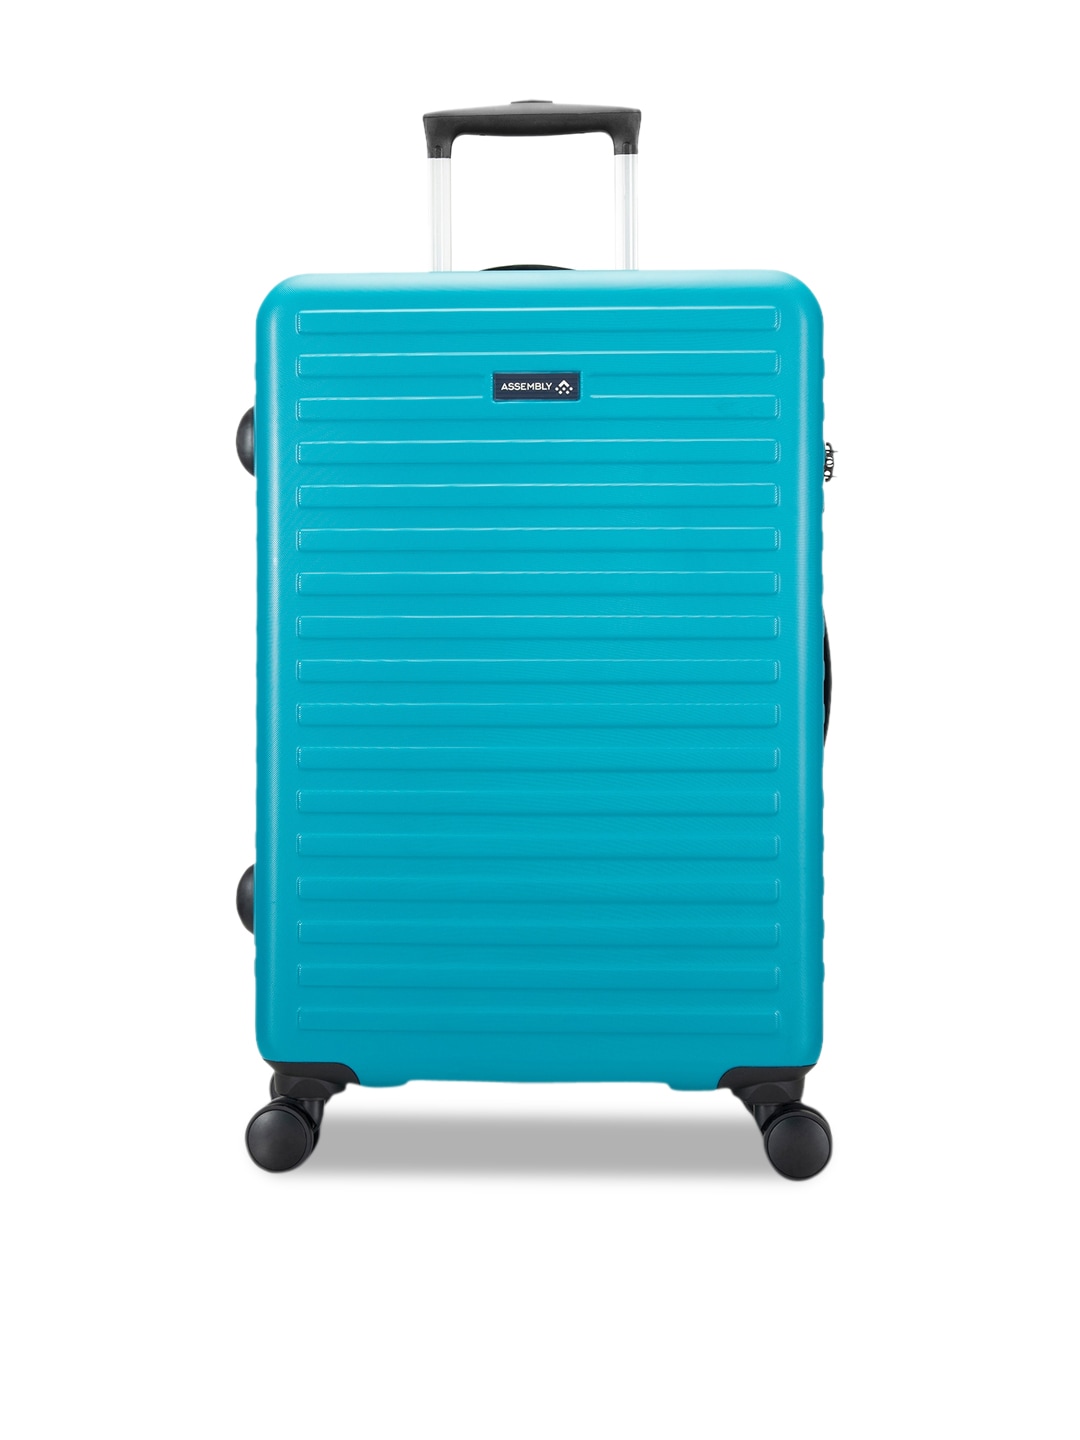 Assembly Teal Blue Textured Hard-Sided Trolley Suitcase Price in India